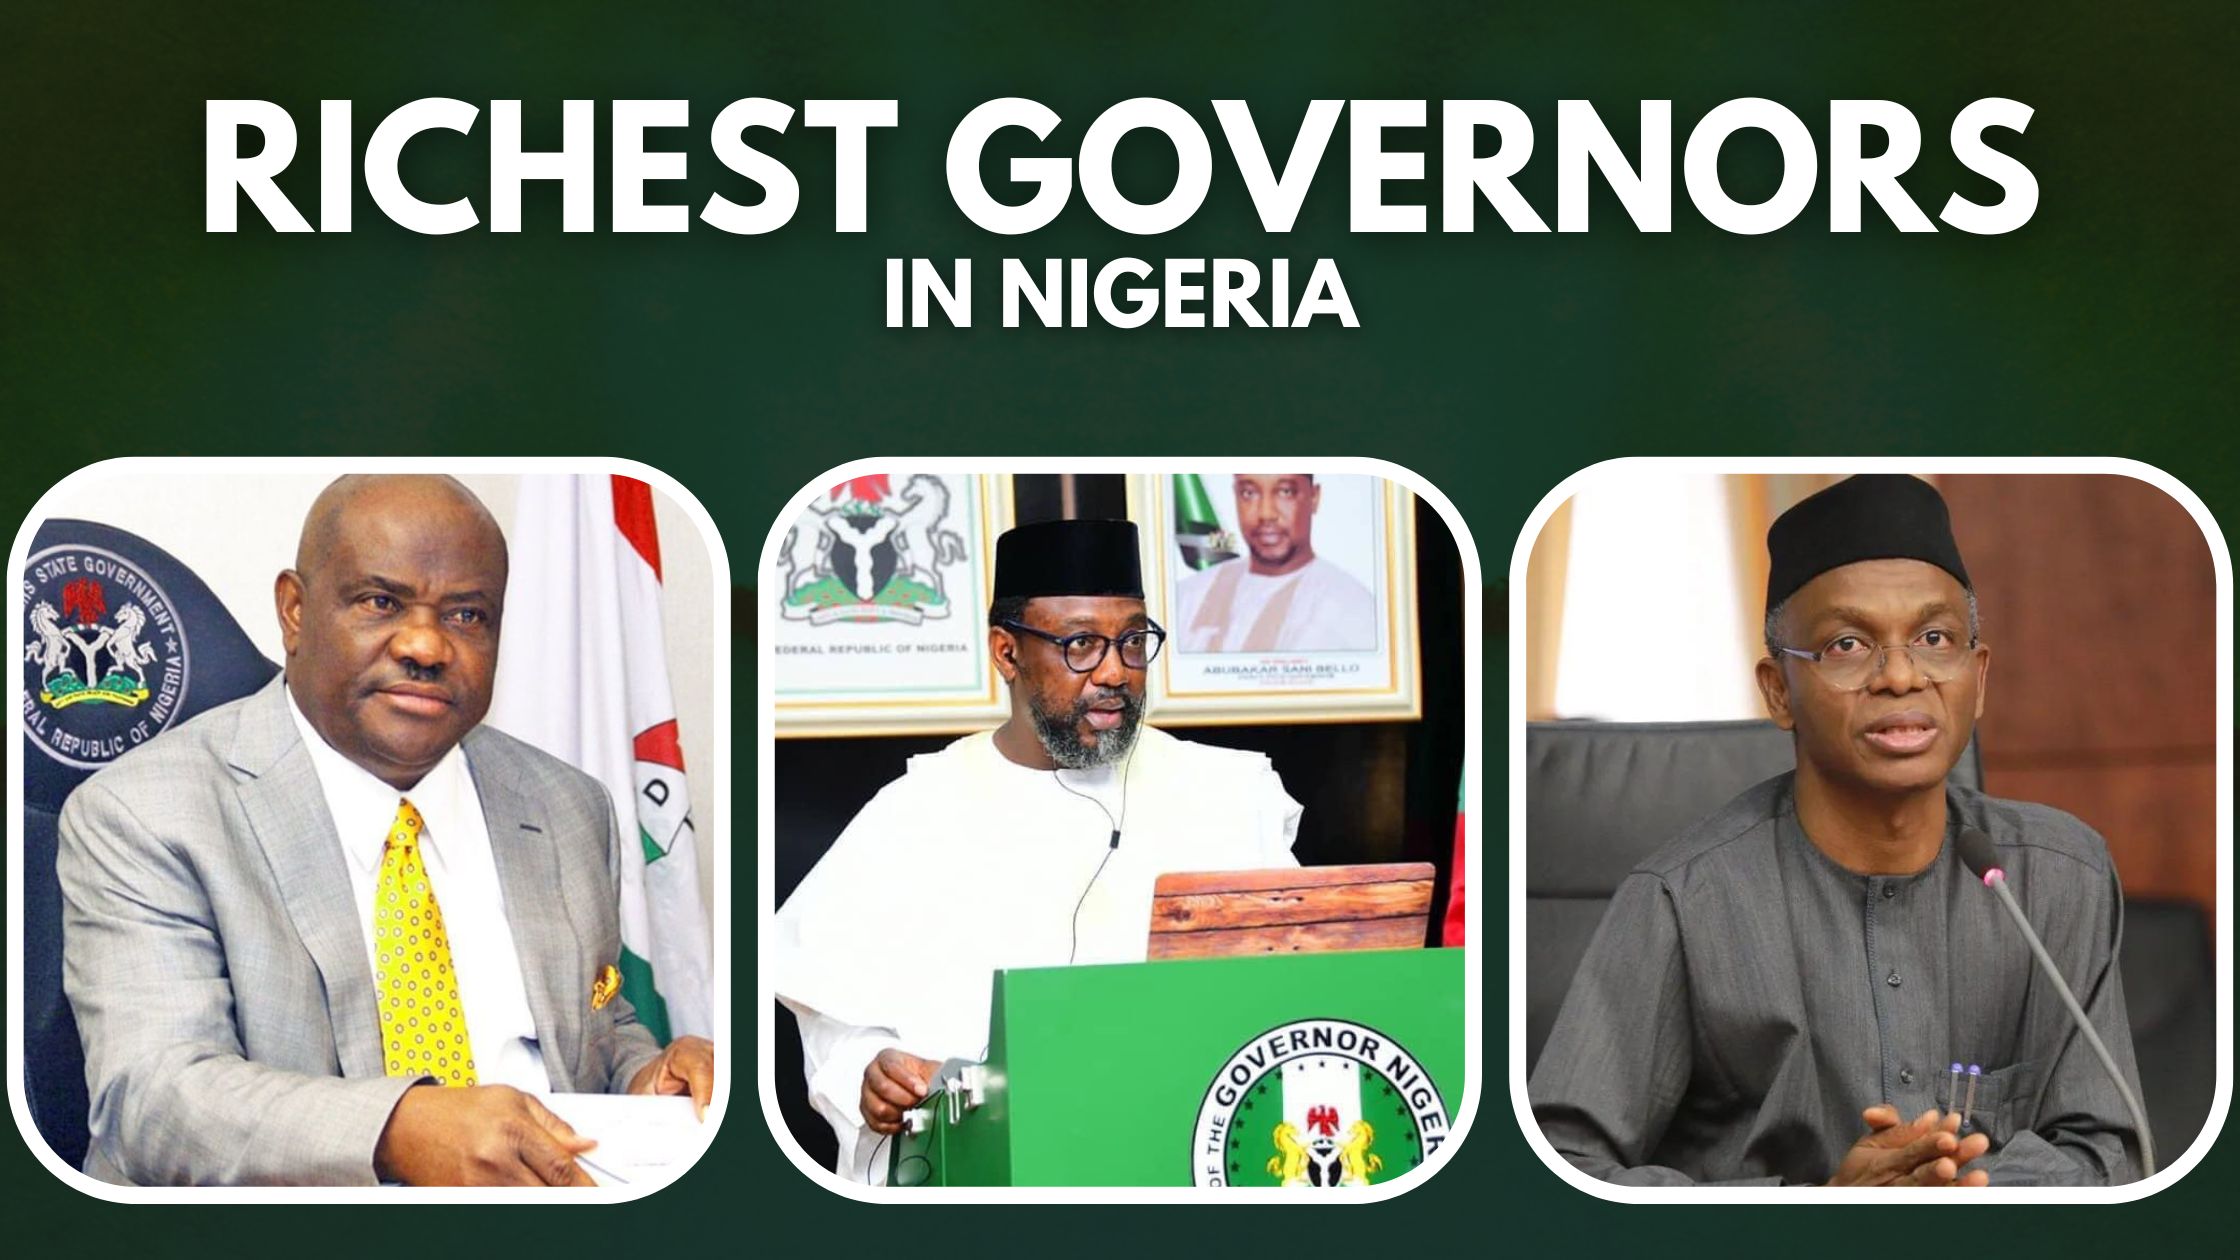 Richest governors in Nigeria